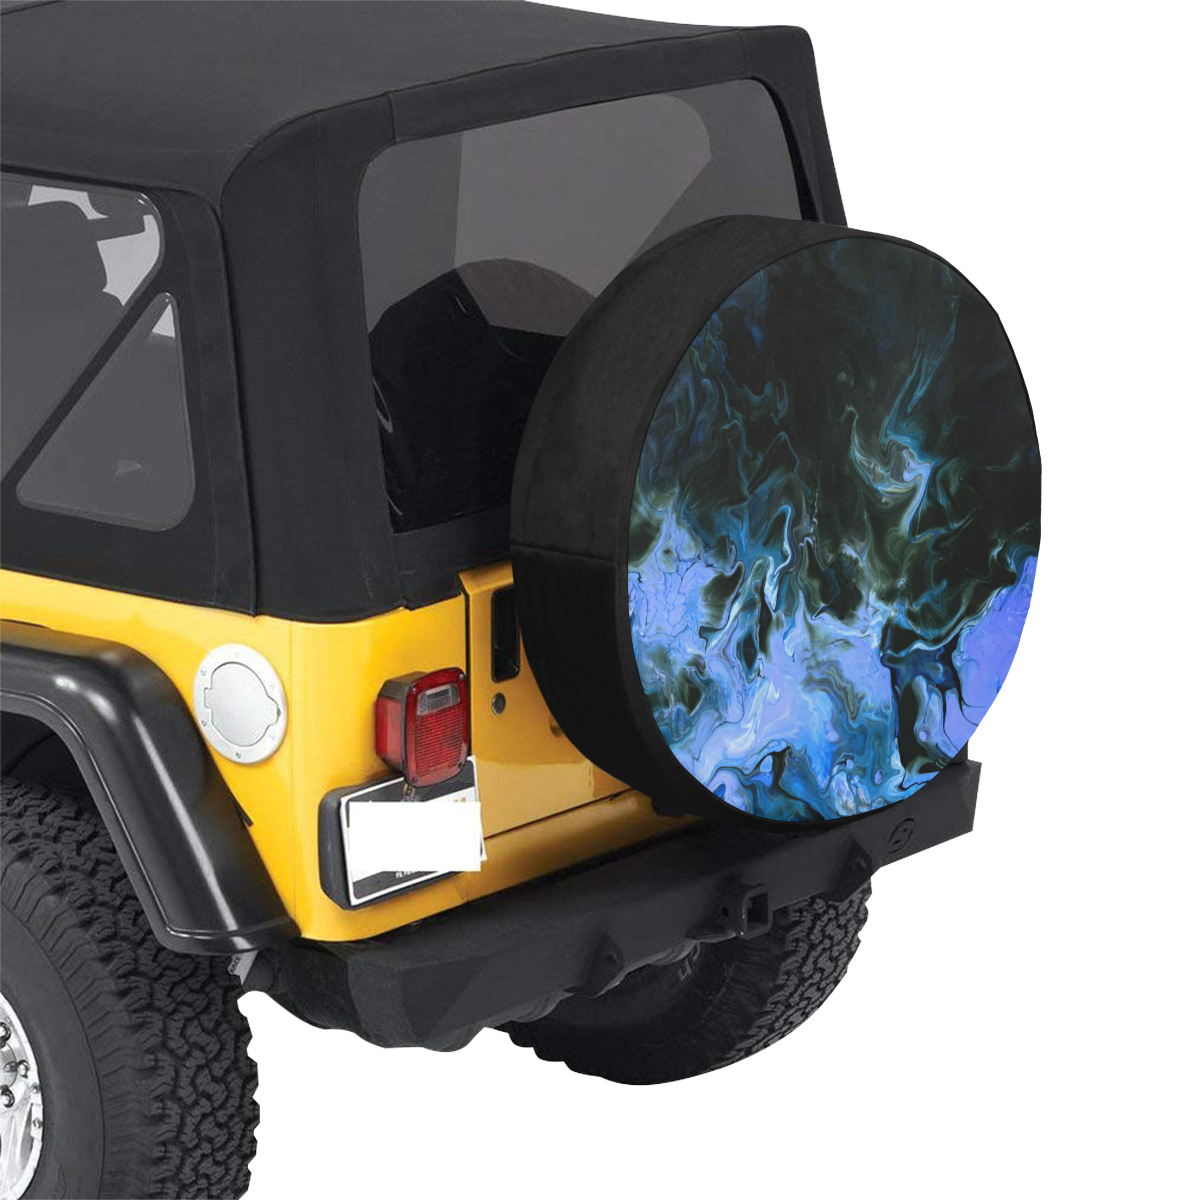 Mystical Blue. 30 Inch Spare Tire Cover